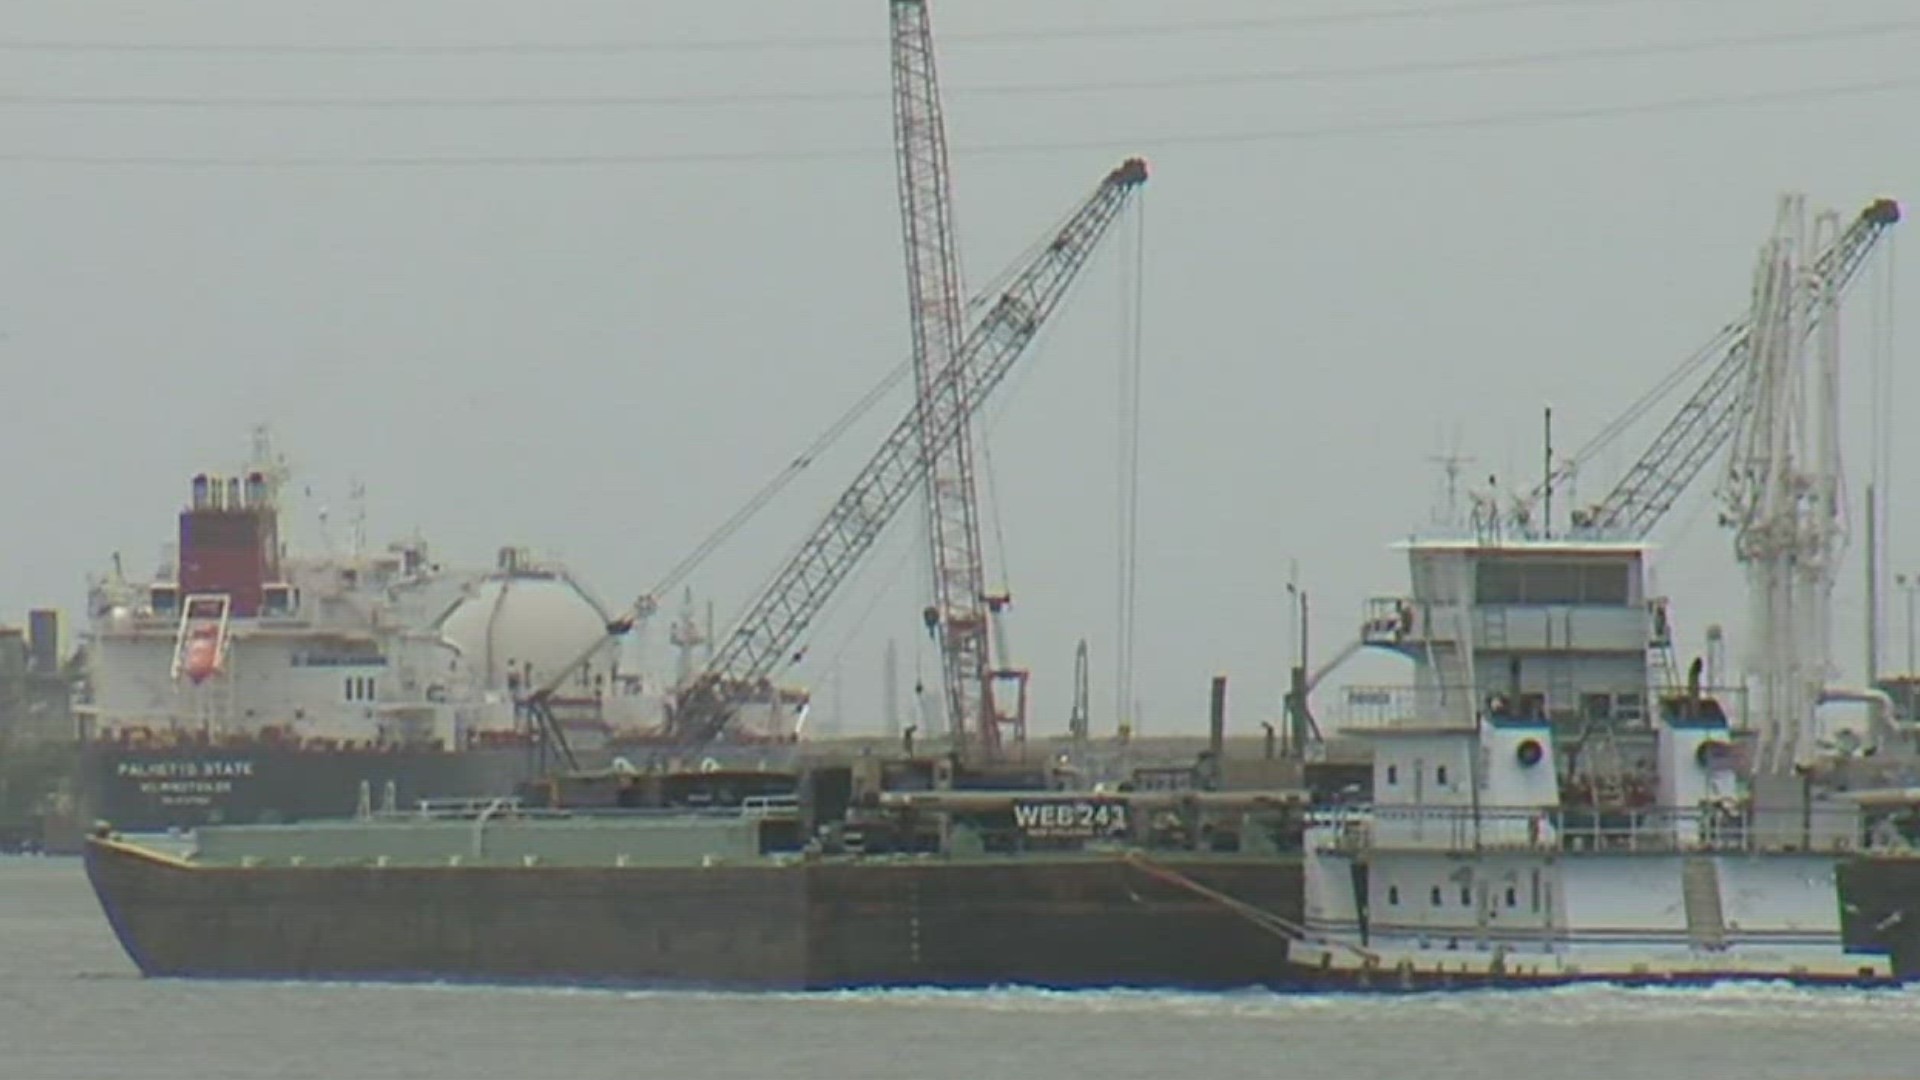 Port of Corpus Christi Chairman Charles Zahn said 46 people have applied for the job.